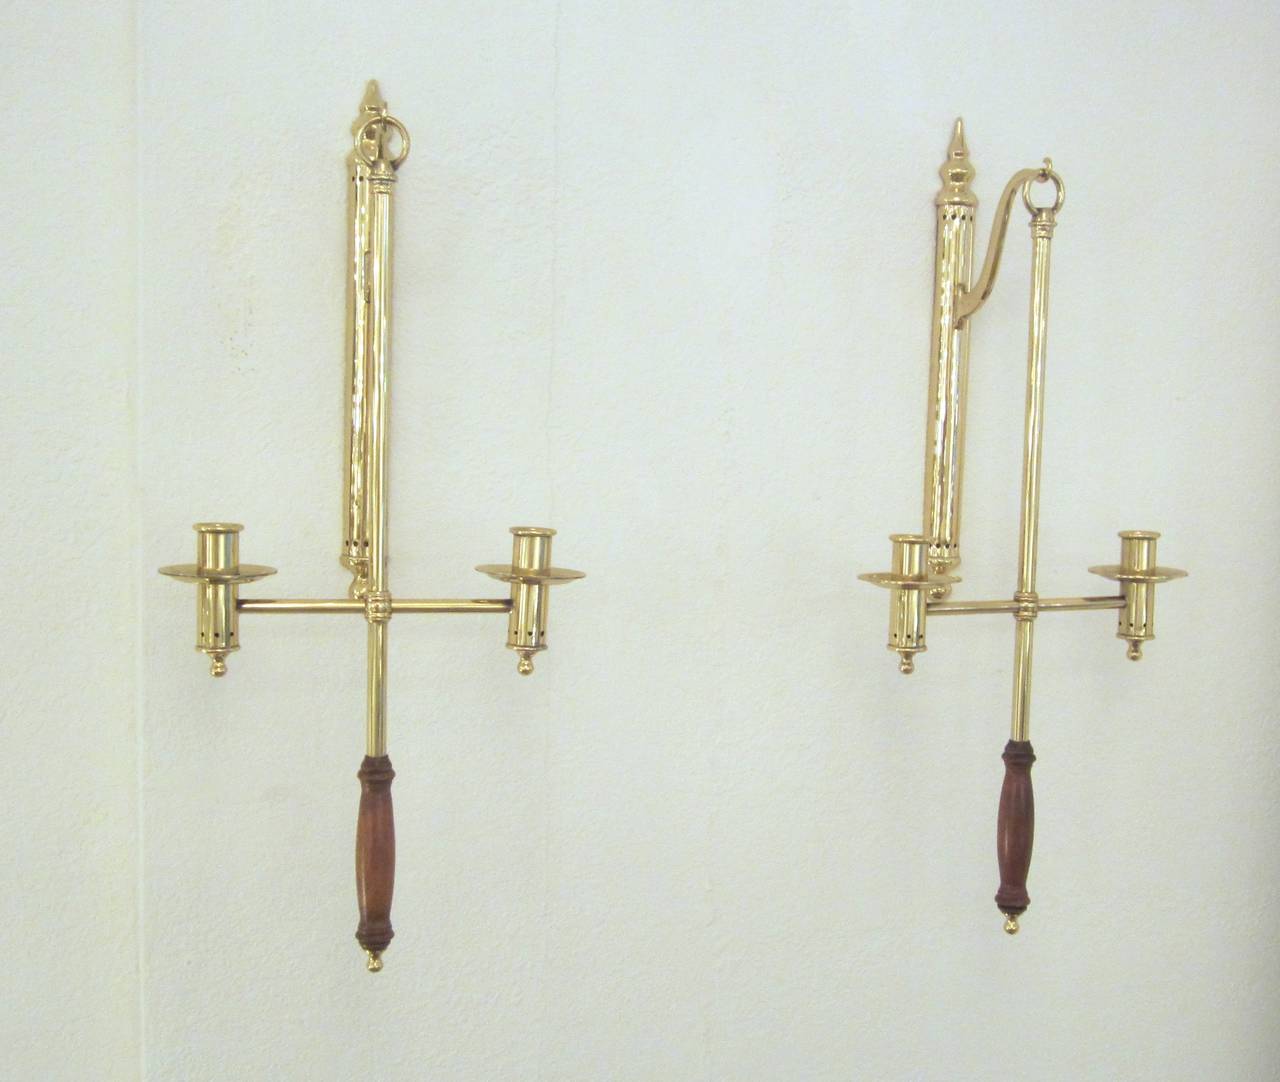 Wonderful pair of polished brass hanging candle sconces with wood handles. They hang from vertical back plates also in polished brass and hold two candles each and are removable to walk through the darkened areas of home. Purchased in West Virginia.